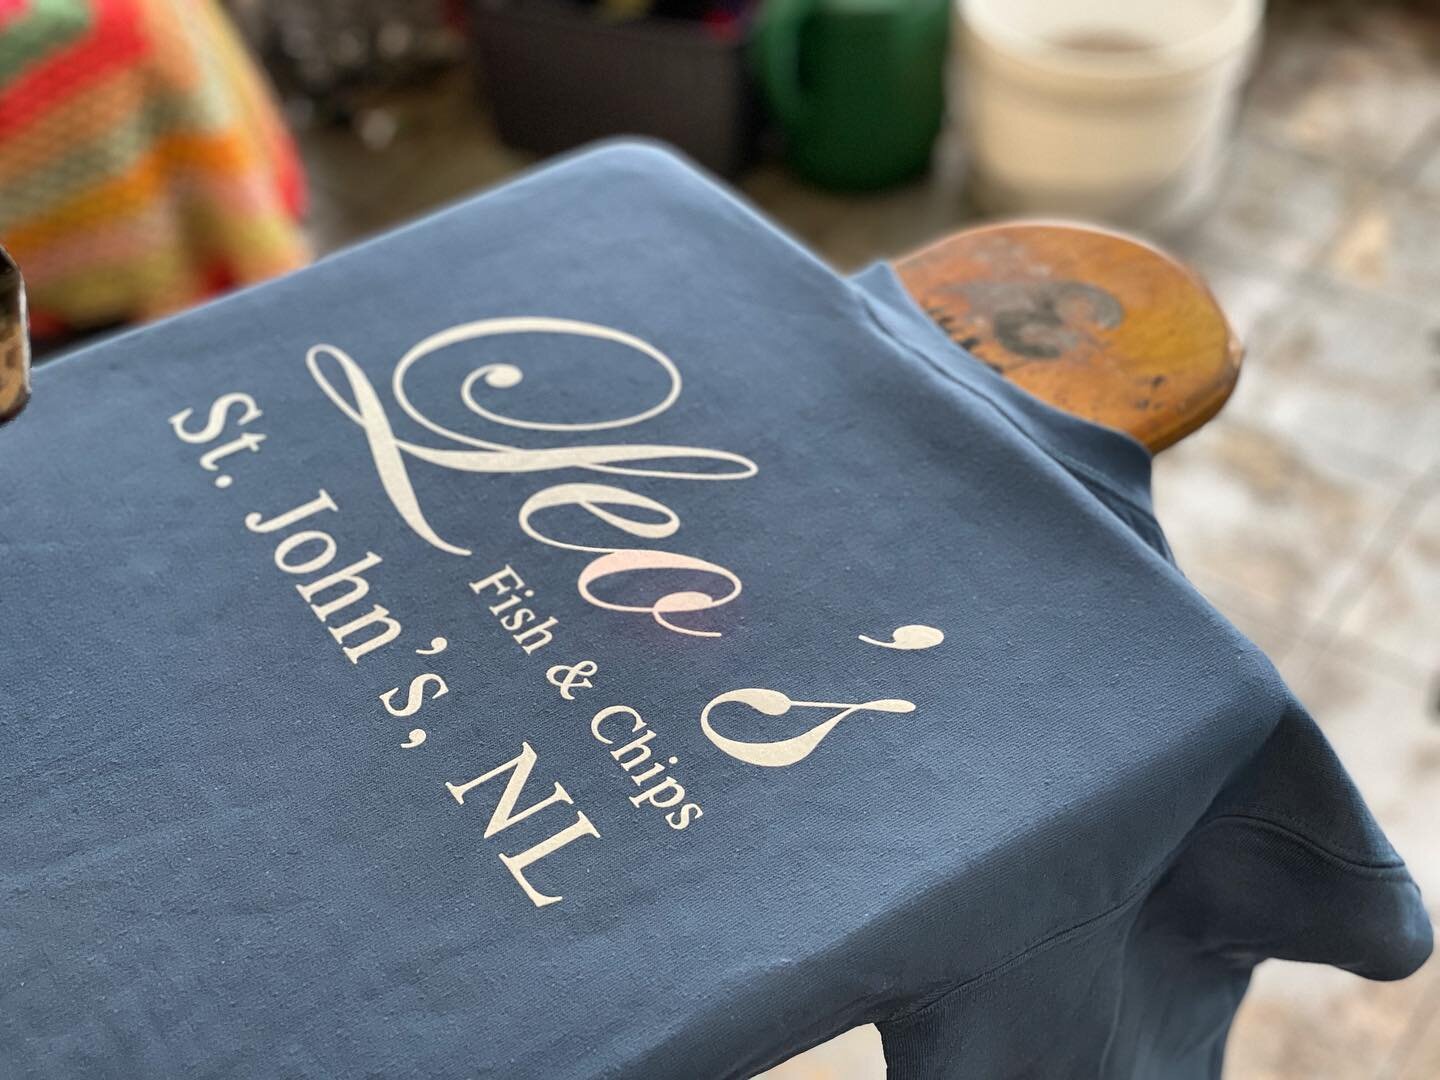 Gotta say - We&rsquo;re honored to have printed these crewnecks for the cultural culinary establishment that is Leo&rsquo;s. Get yourself a sweater and a two piece. You won&rsquo;t regret it! #newfoundland #screenprinting #customshirts #printshop #ts